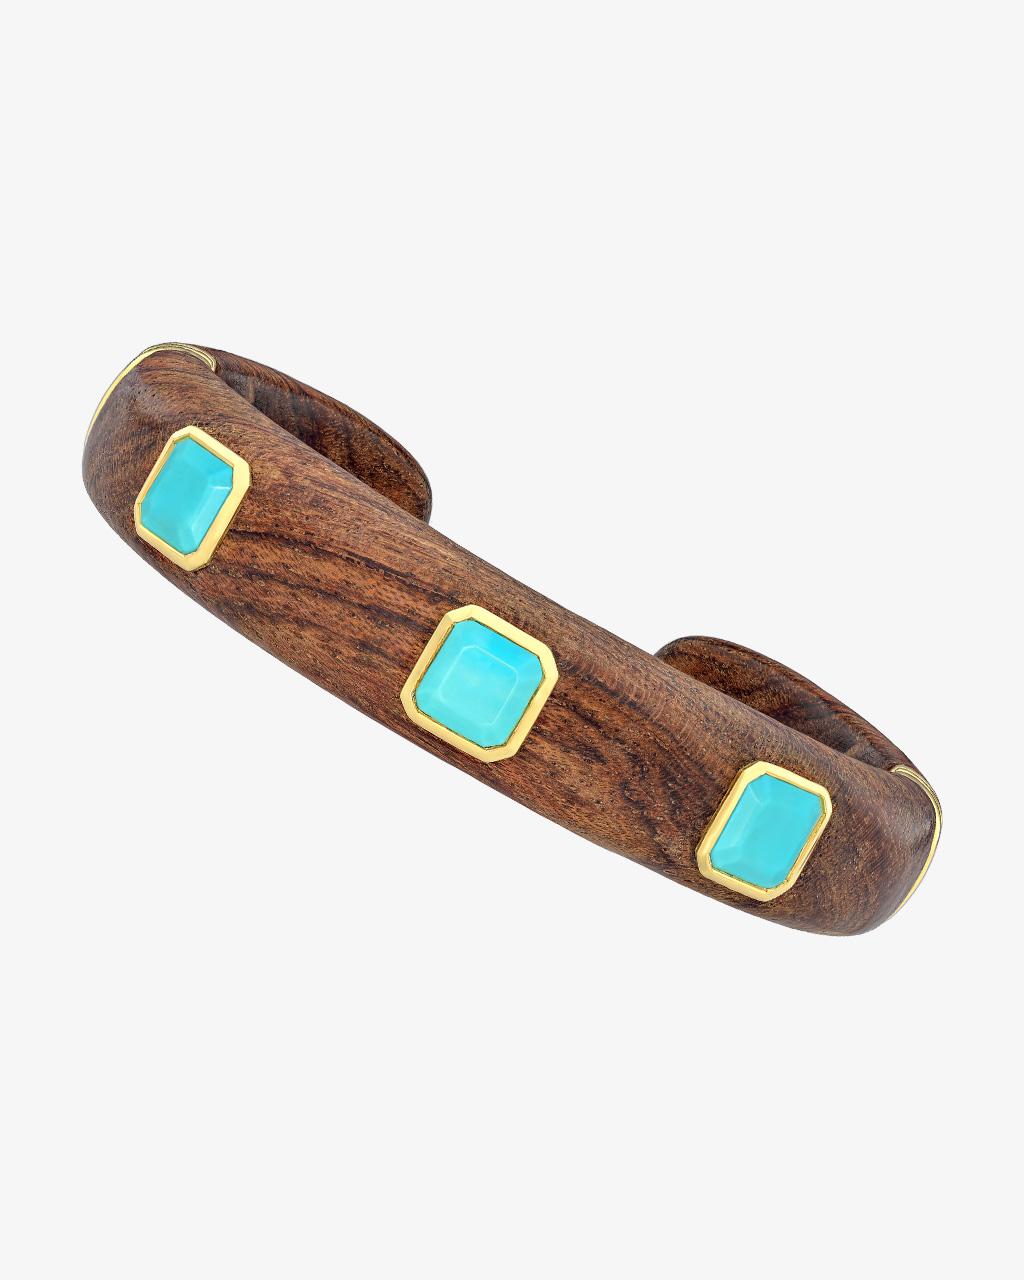 Rosewood Turquoise Cuff